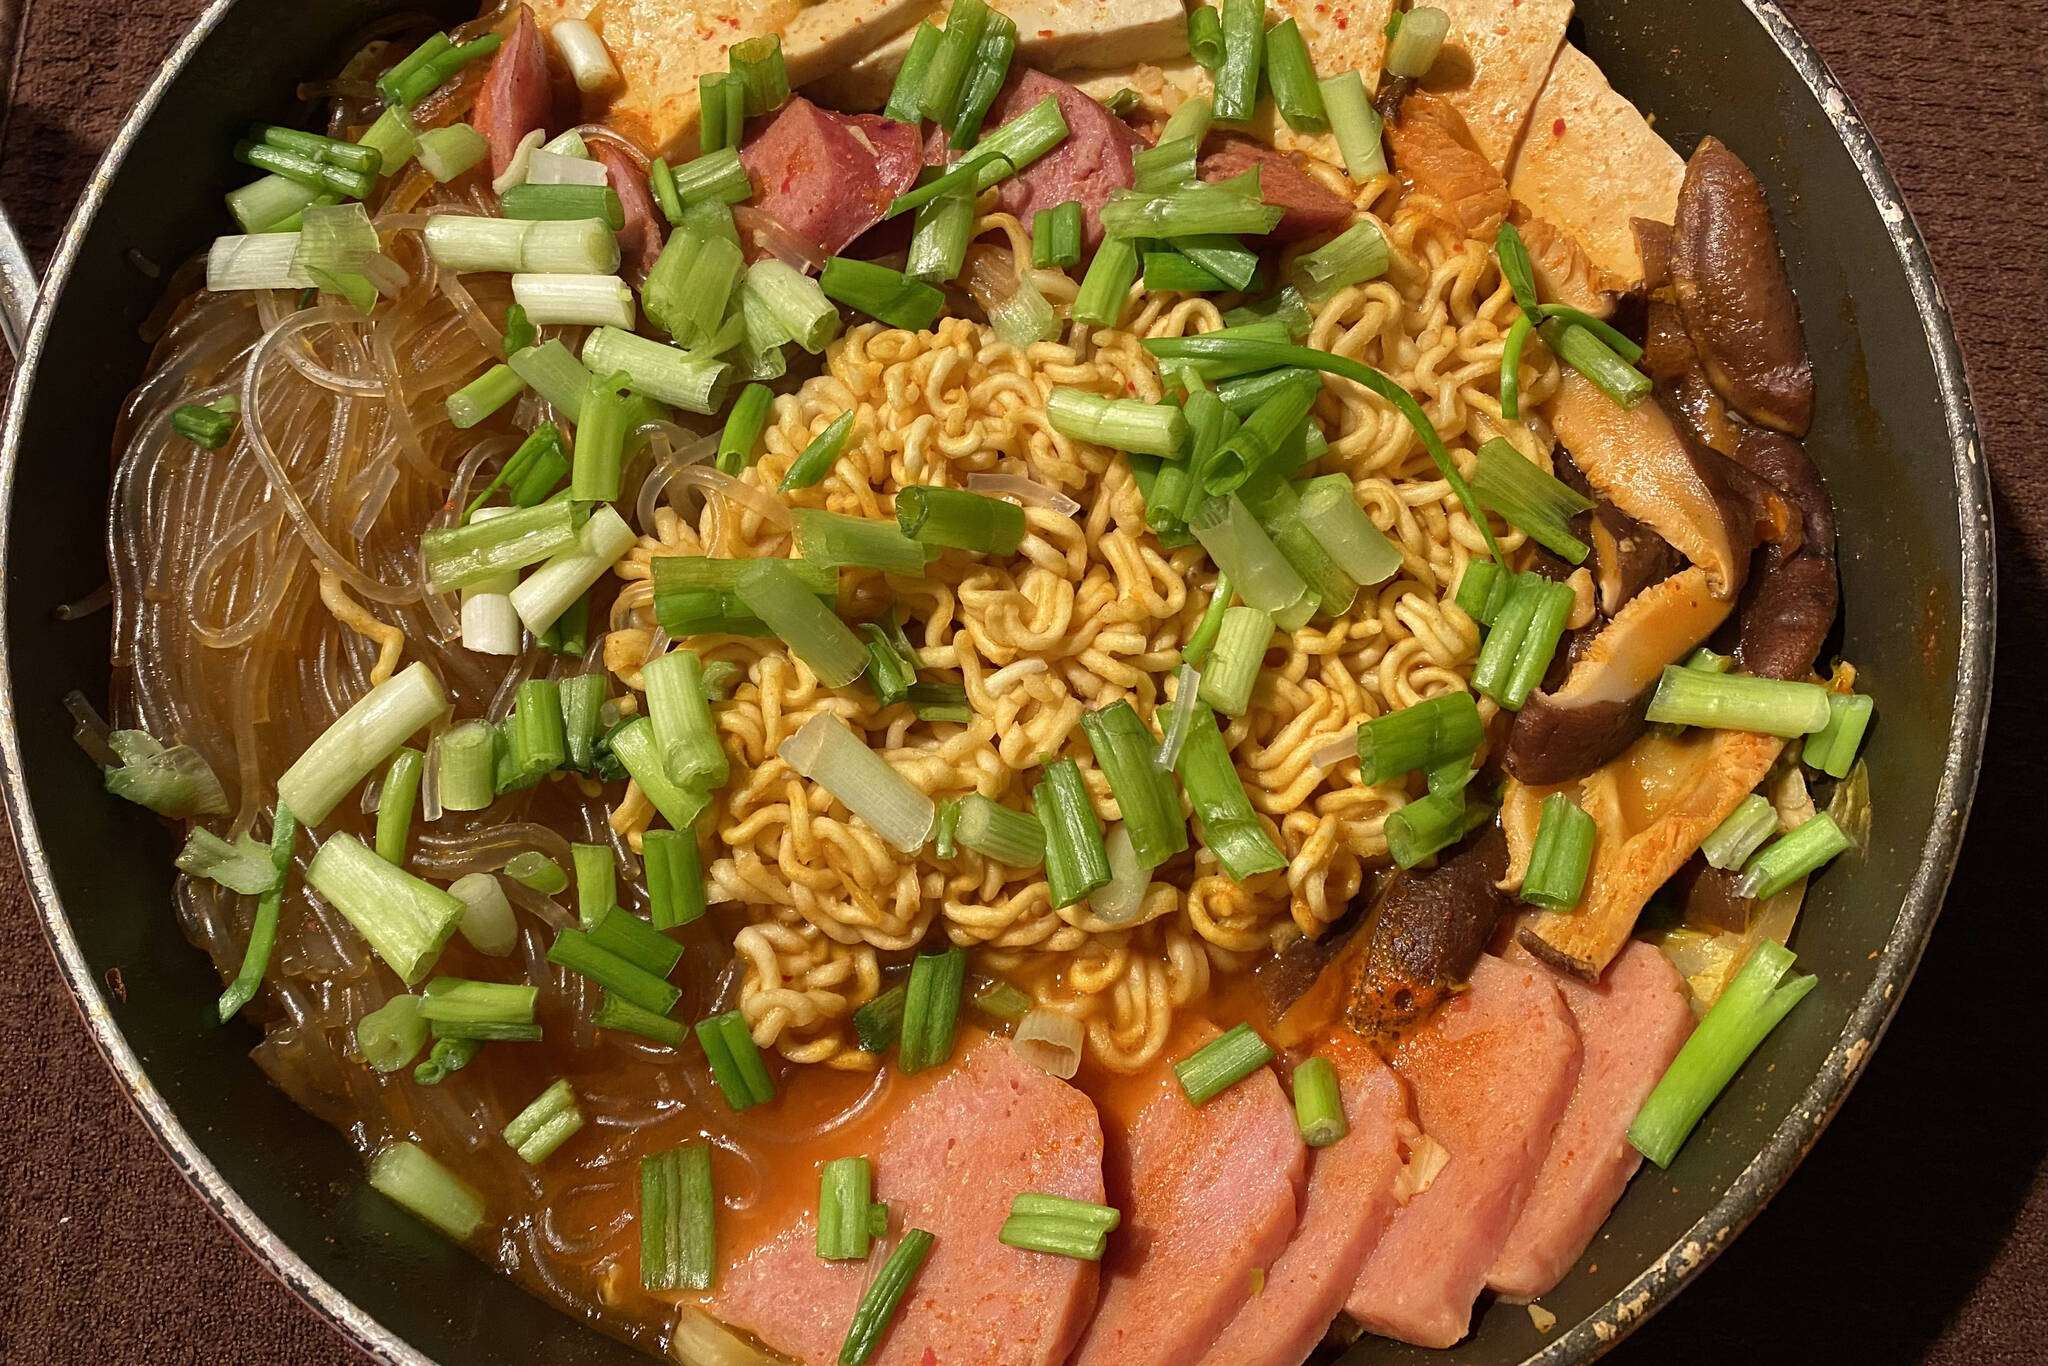 Traditional ingredients like kimchi, ramen and tofu are mixed with American comfort food Spam in this hearty Korean stew. (Photo by Tressa Dale/Peninsula Clarion)